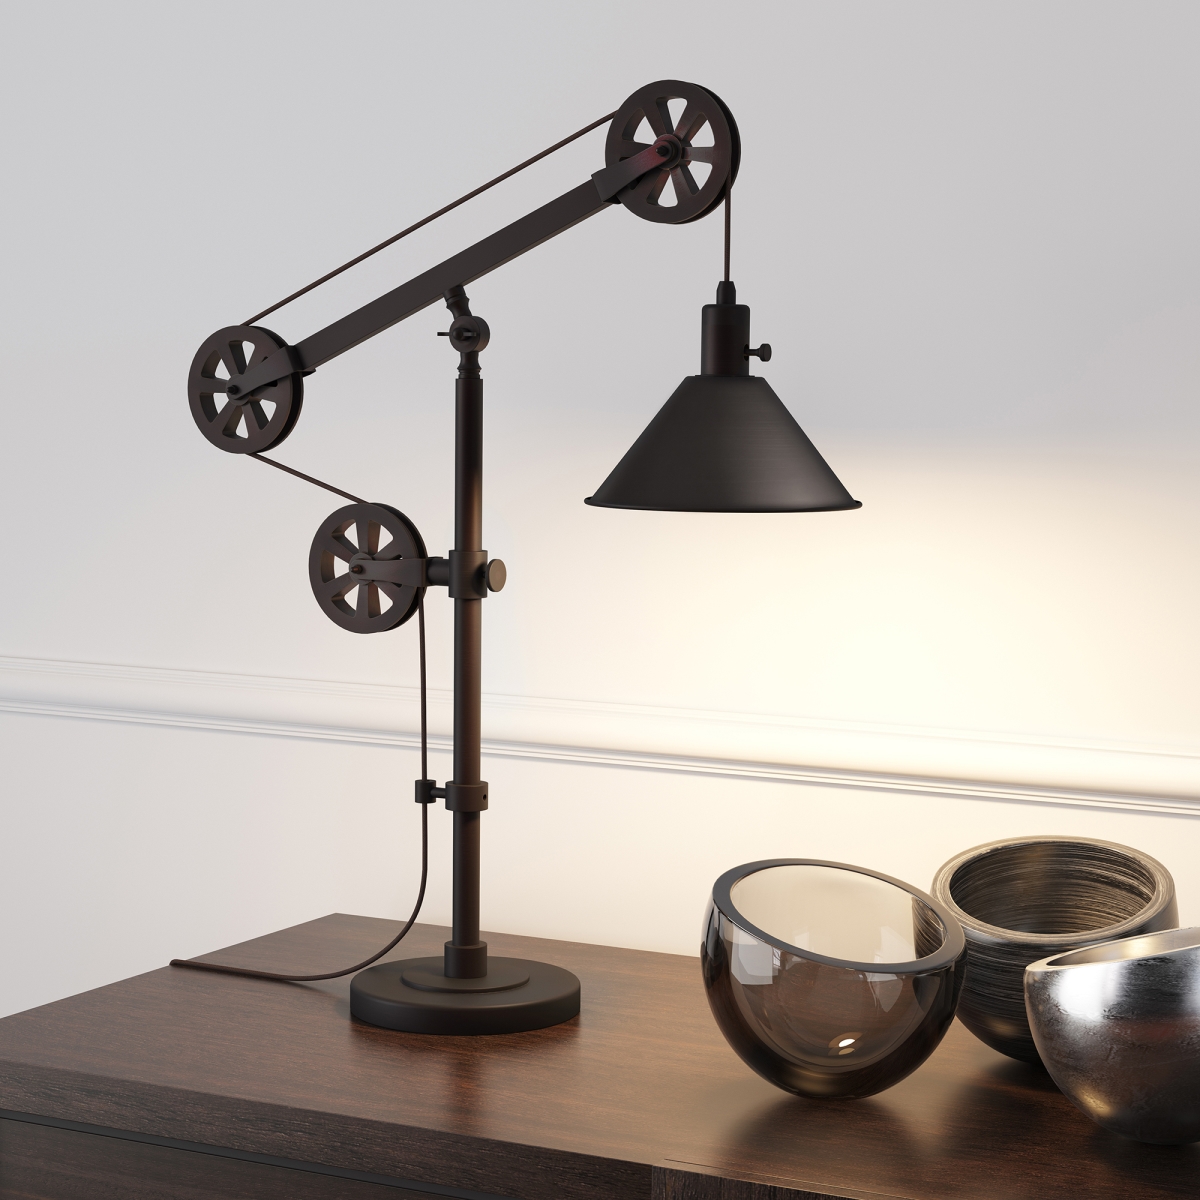 Henn & Hart TL0103 Descartes Blackened Bronze Table Lamp with Pulley System